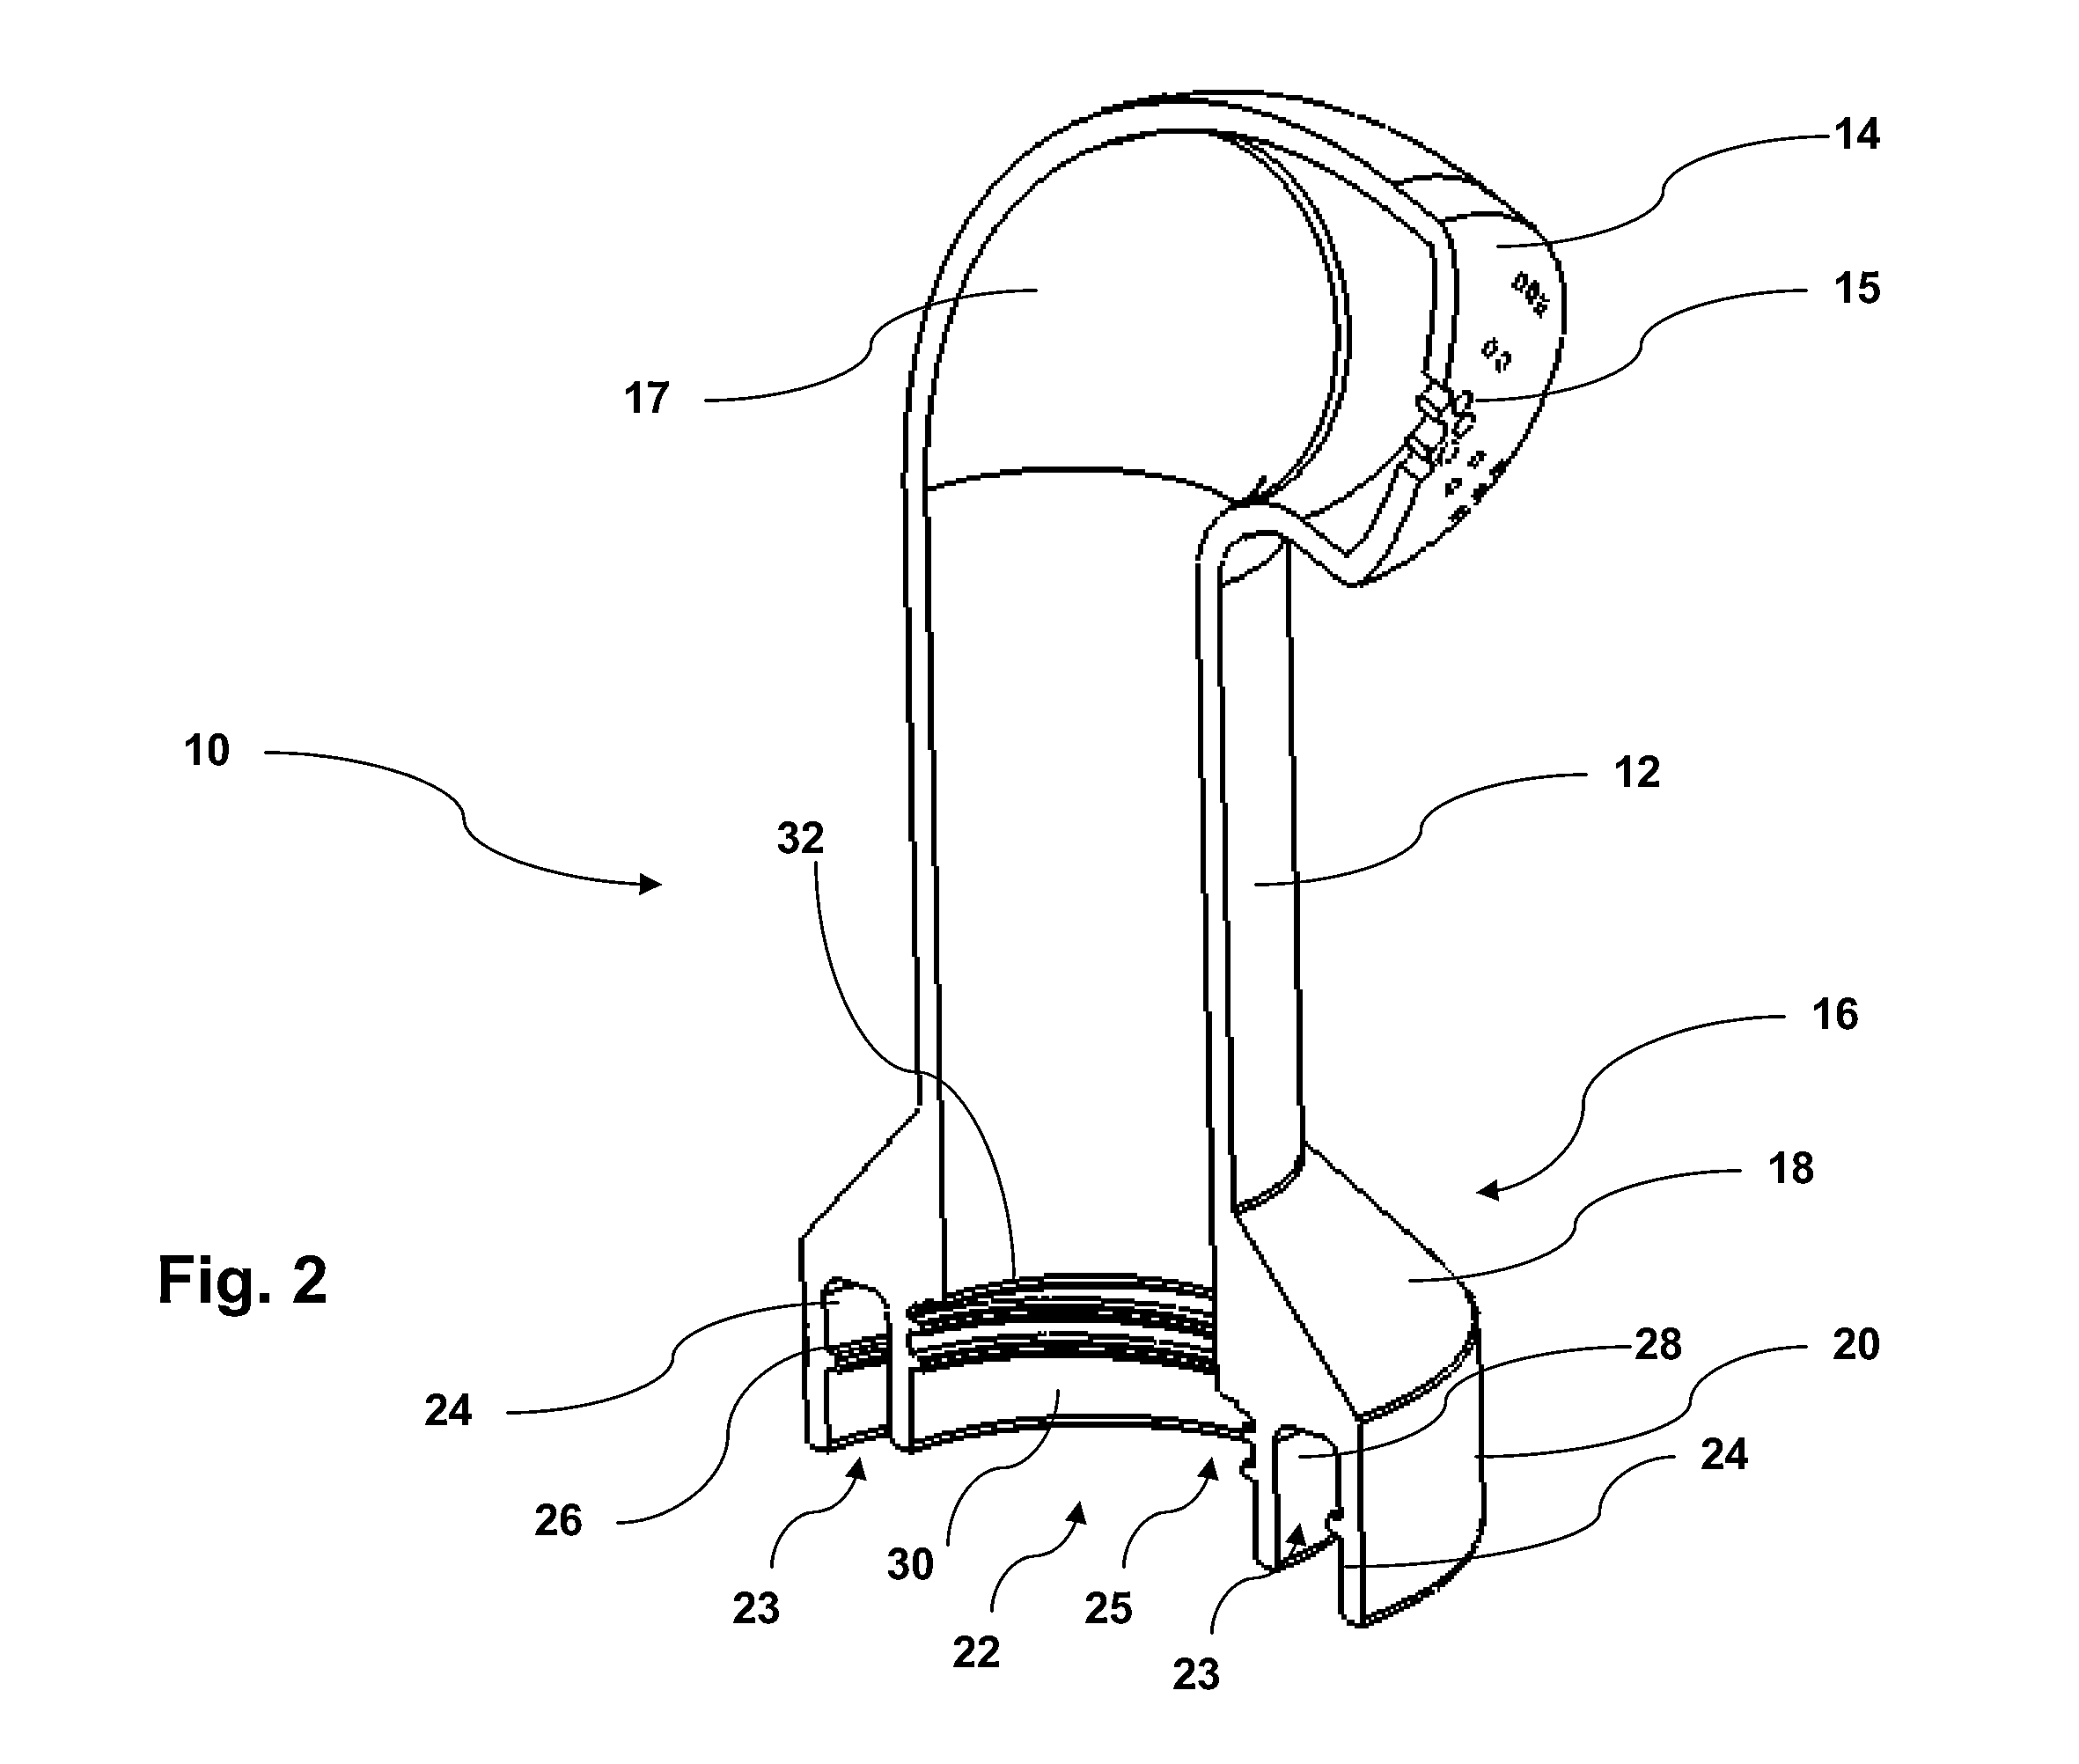 Systems and Methods for Producing Streams of Fluid